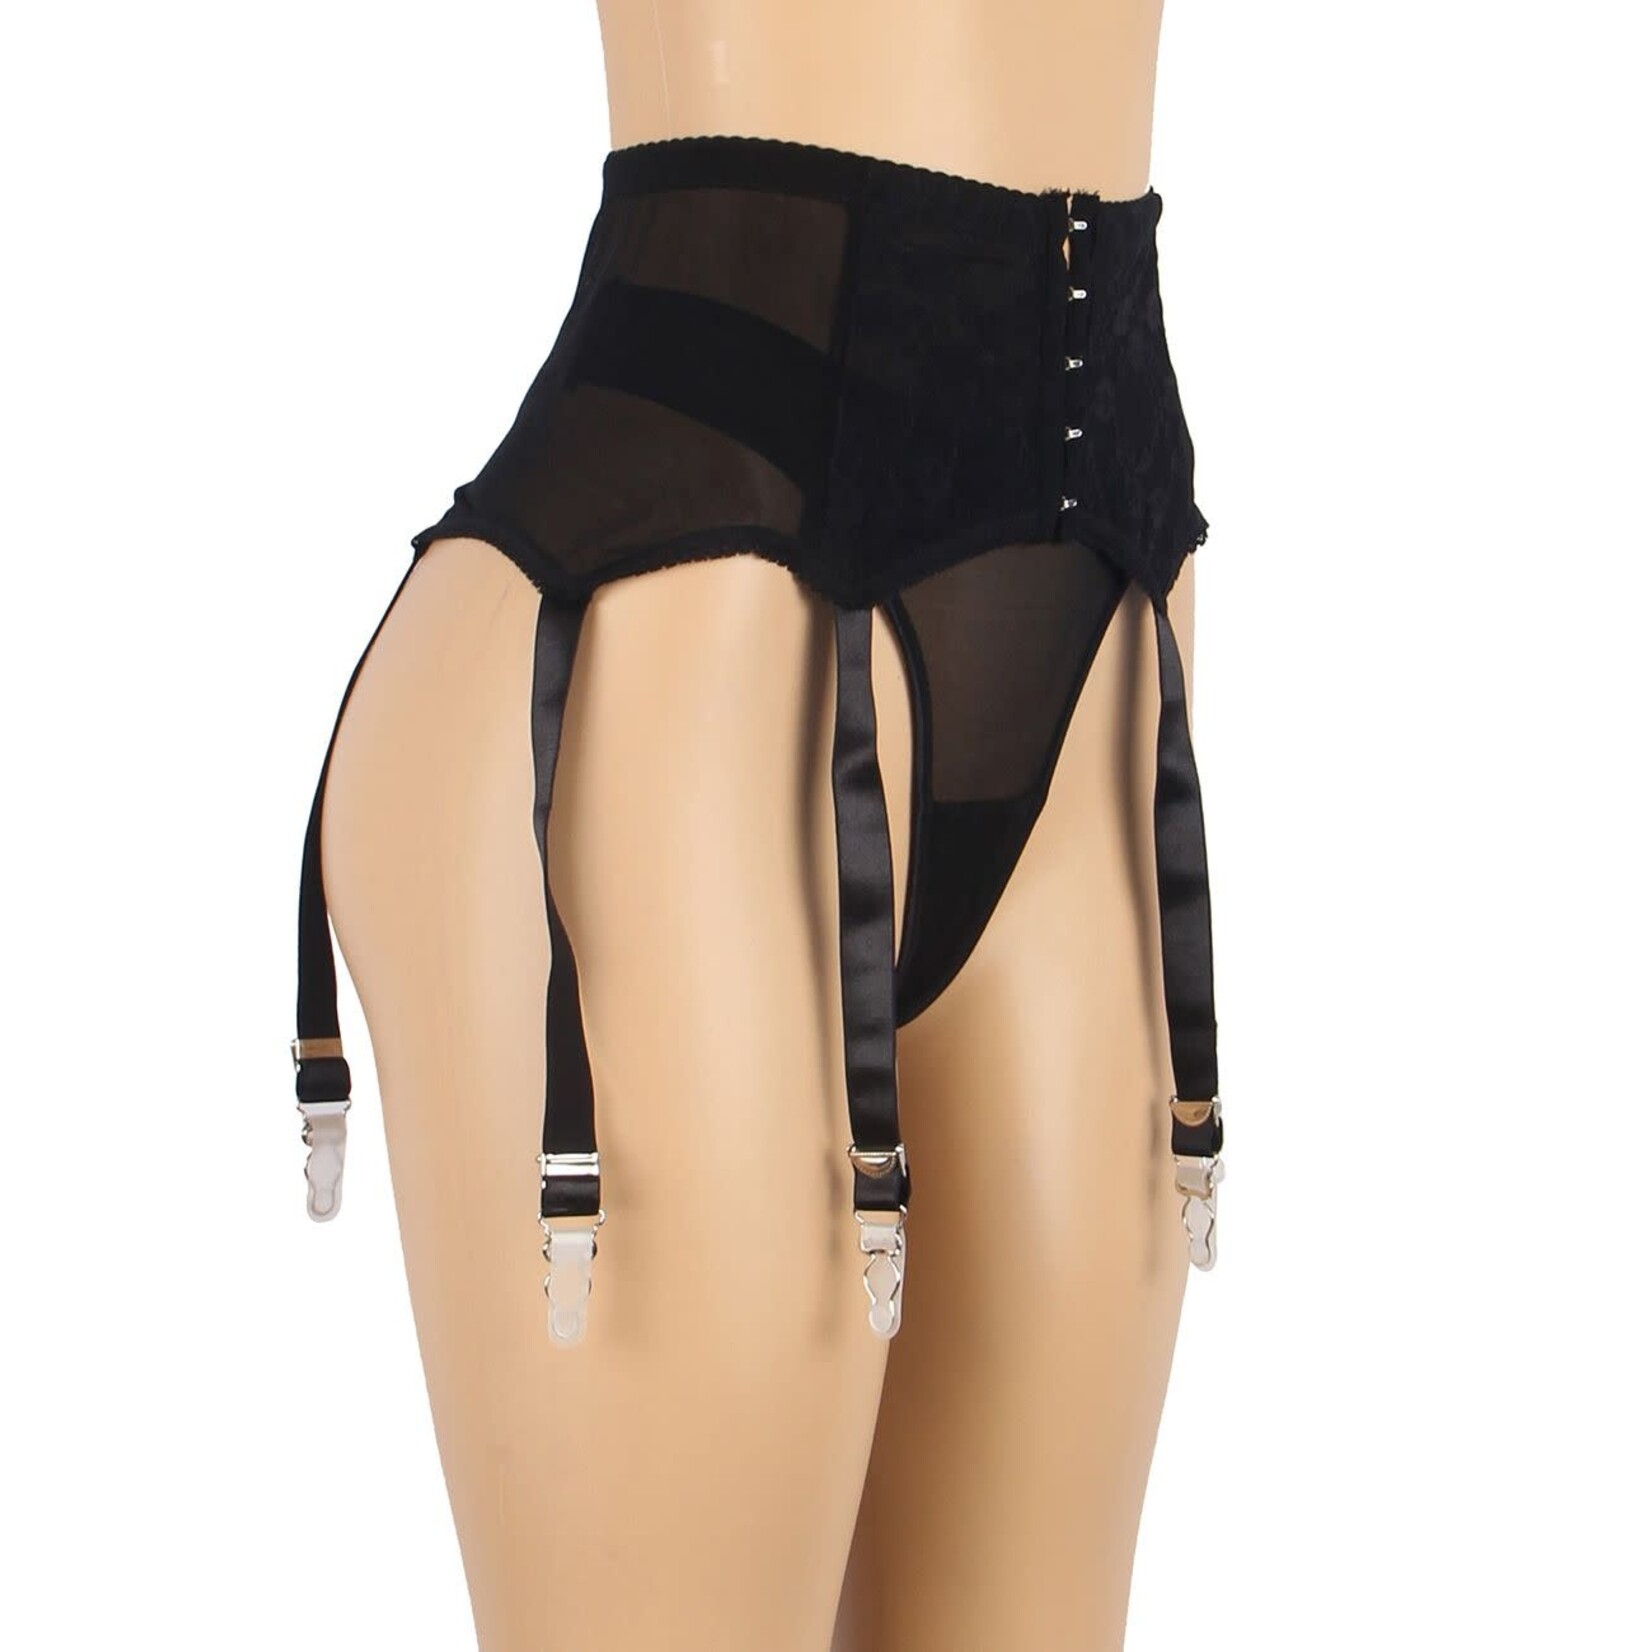 OH YEAH! -  BLACK SEXY LACE GARTER FIVE HOOK AND EYE PANTY XS-S